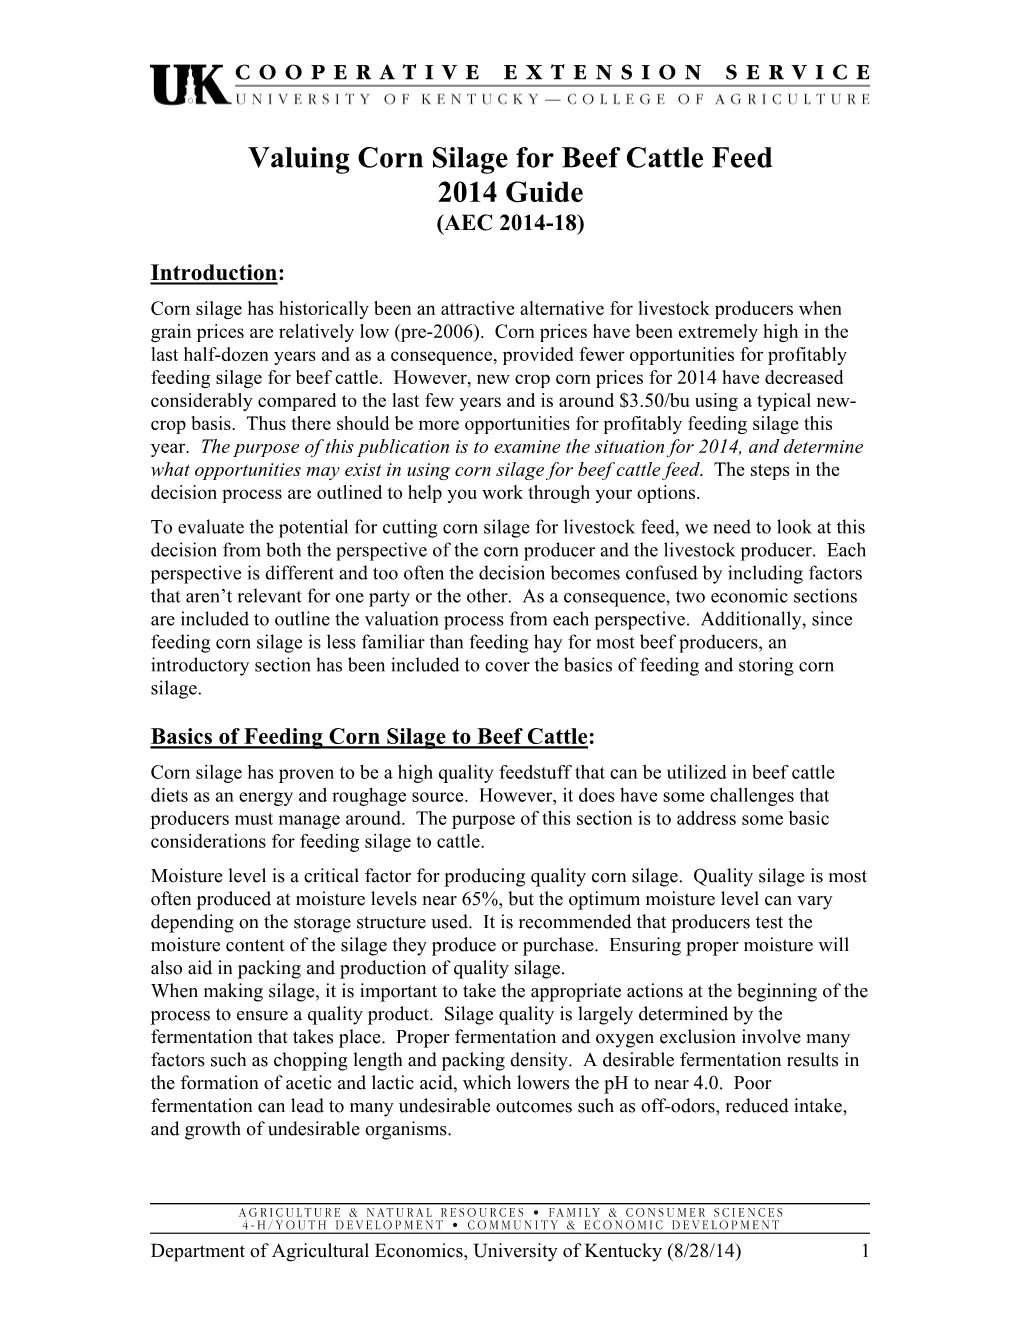 Valuing Corn Silage for Beef Cattle Feed 2014 Guide (AEC 2014-18)